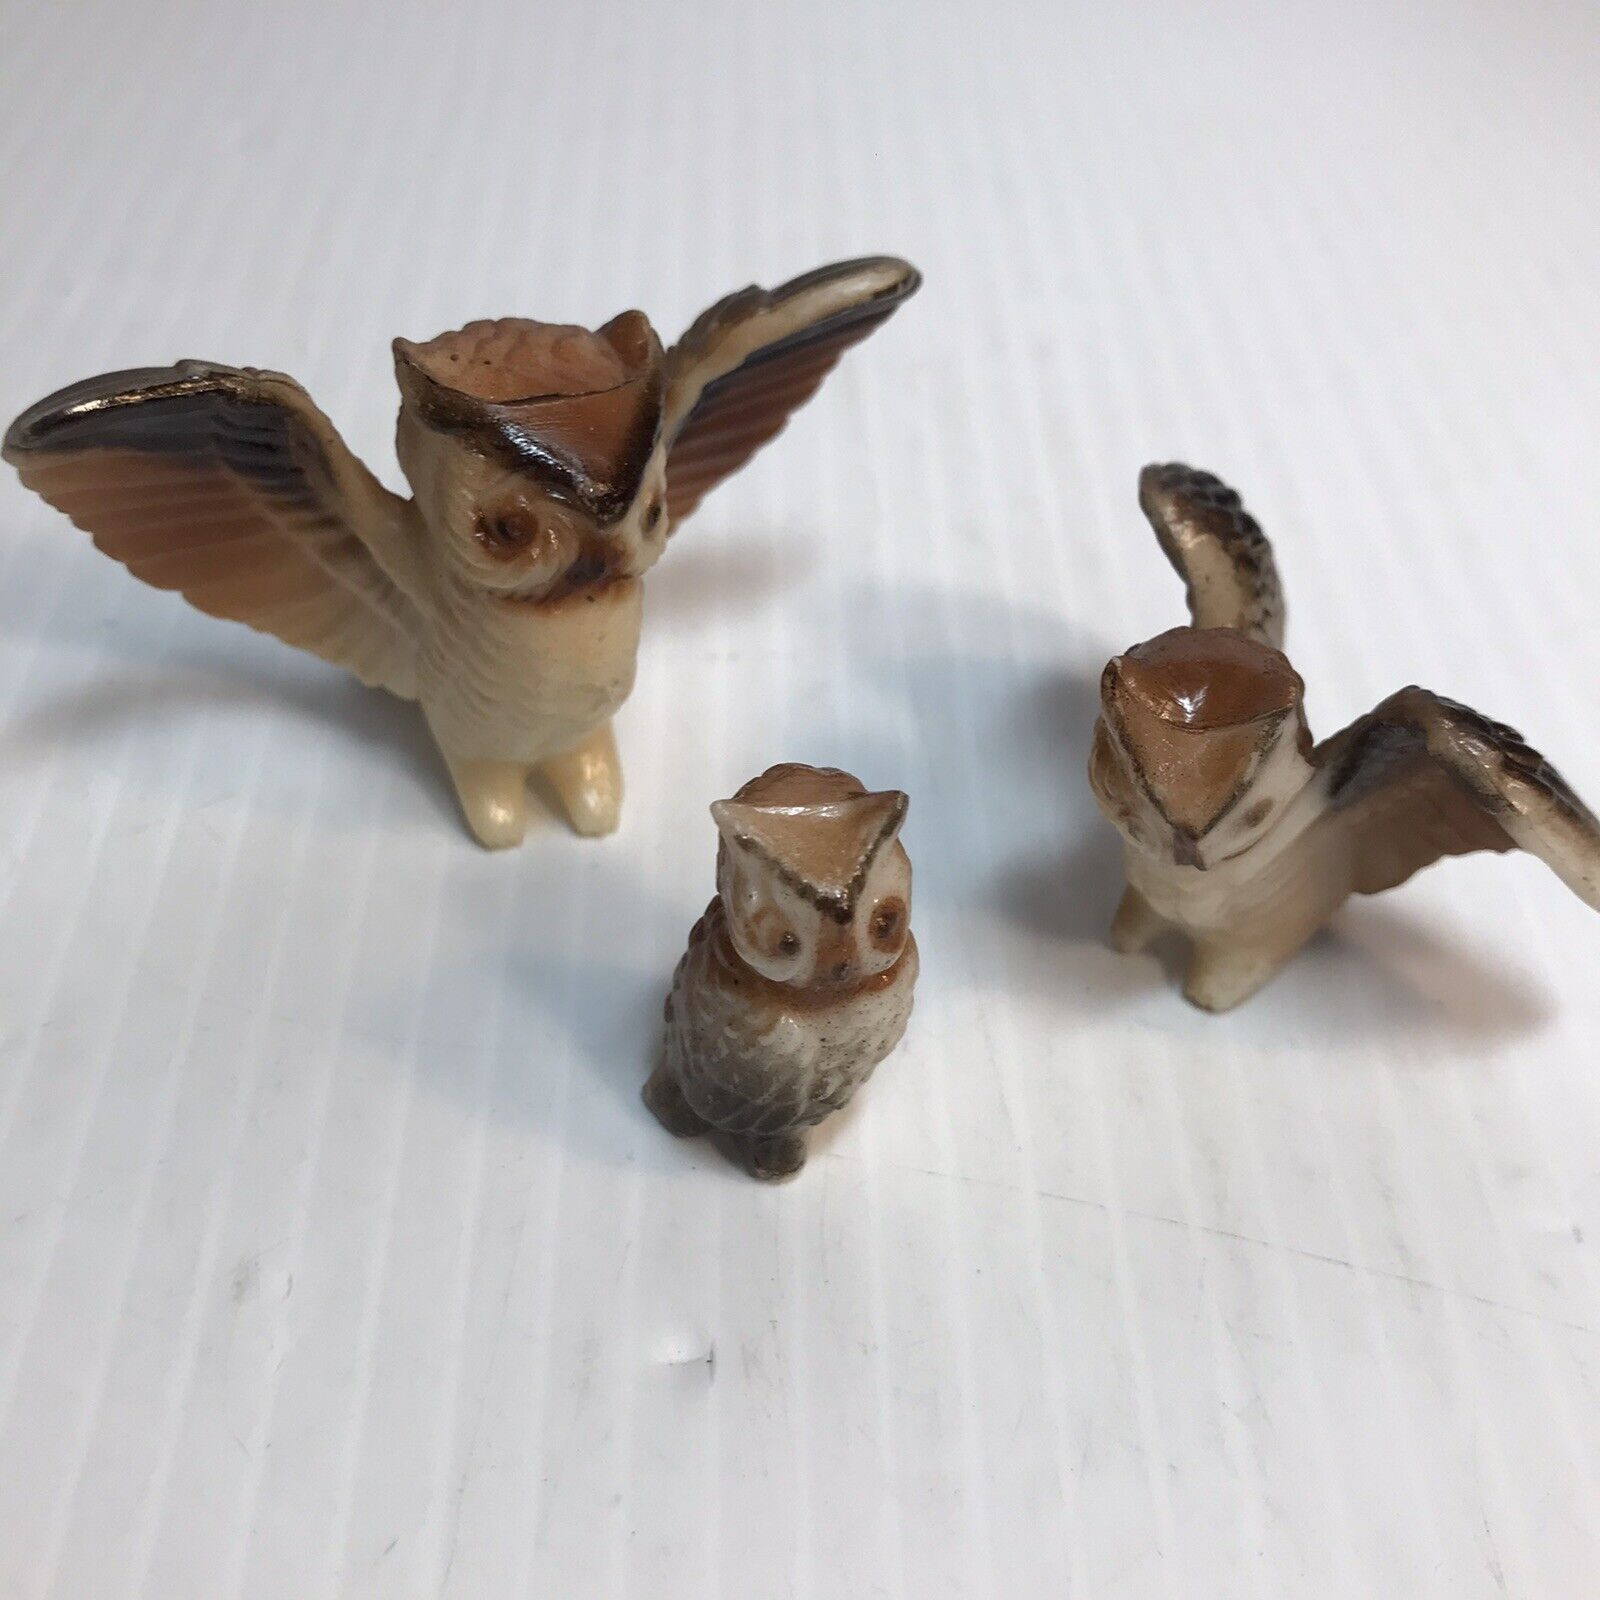 Vintage Miniature Plastic Owl Family Set of 3 Figurines 1970s 2 inches tall